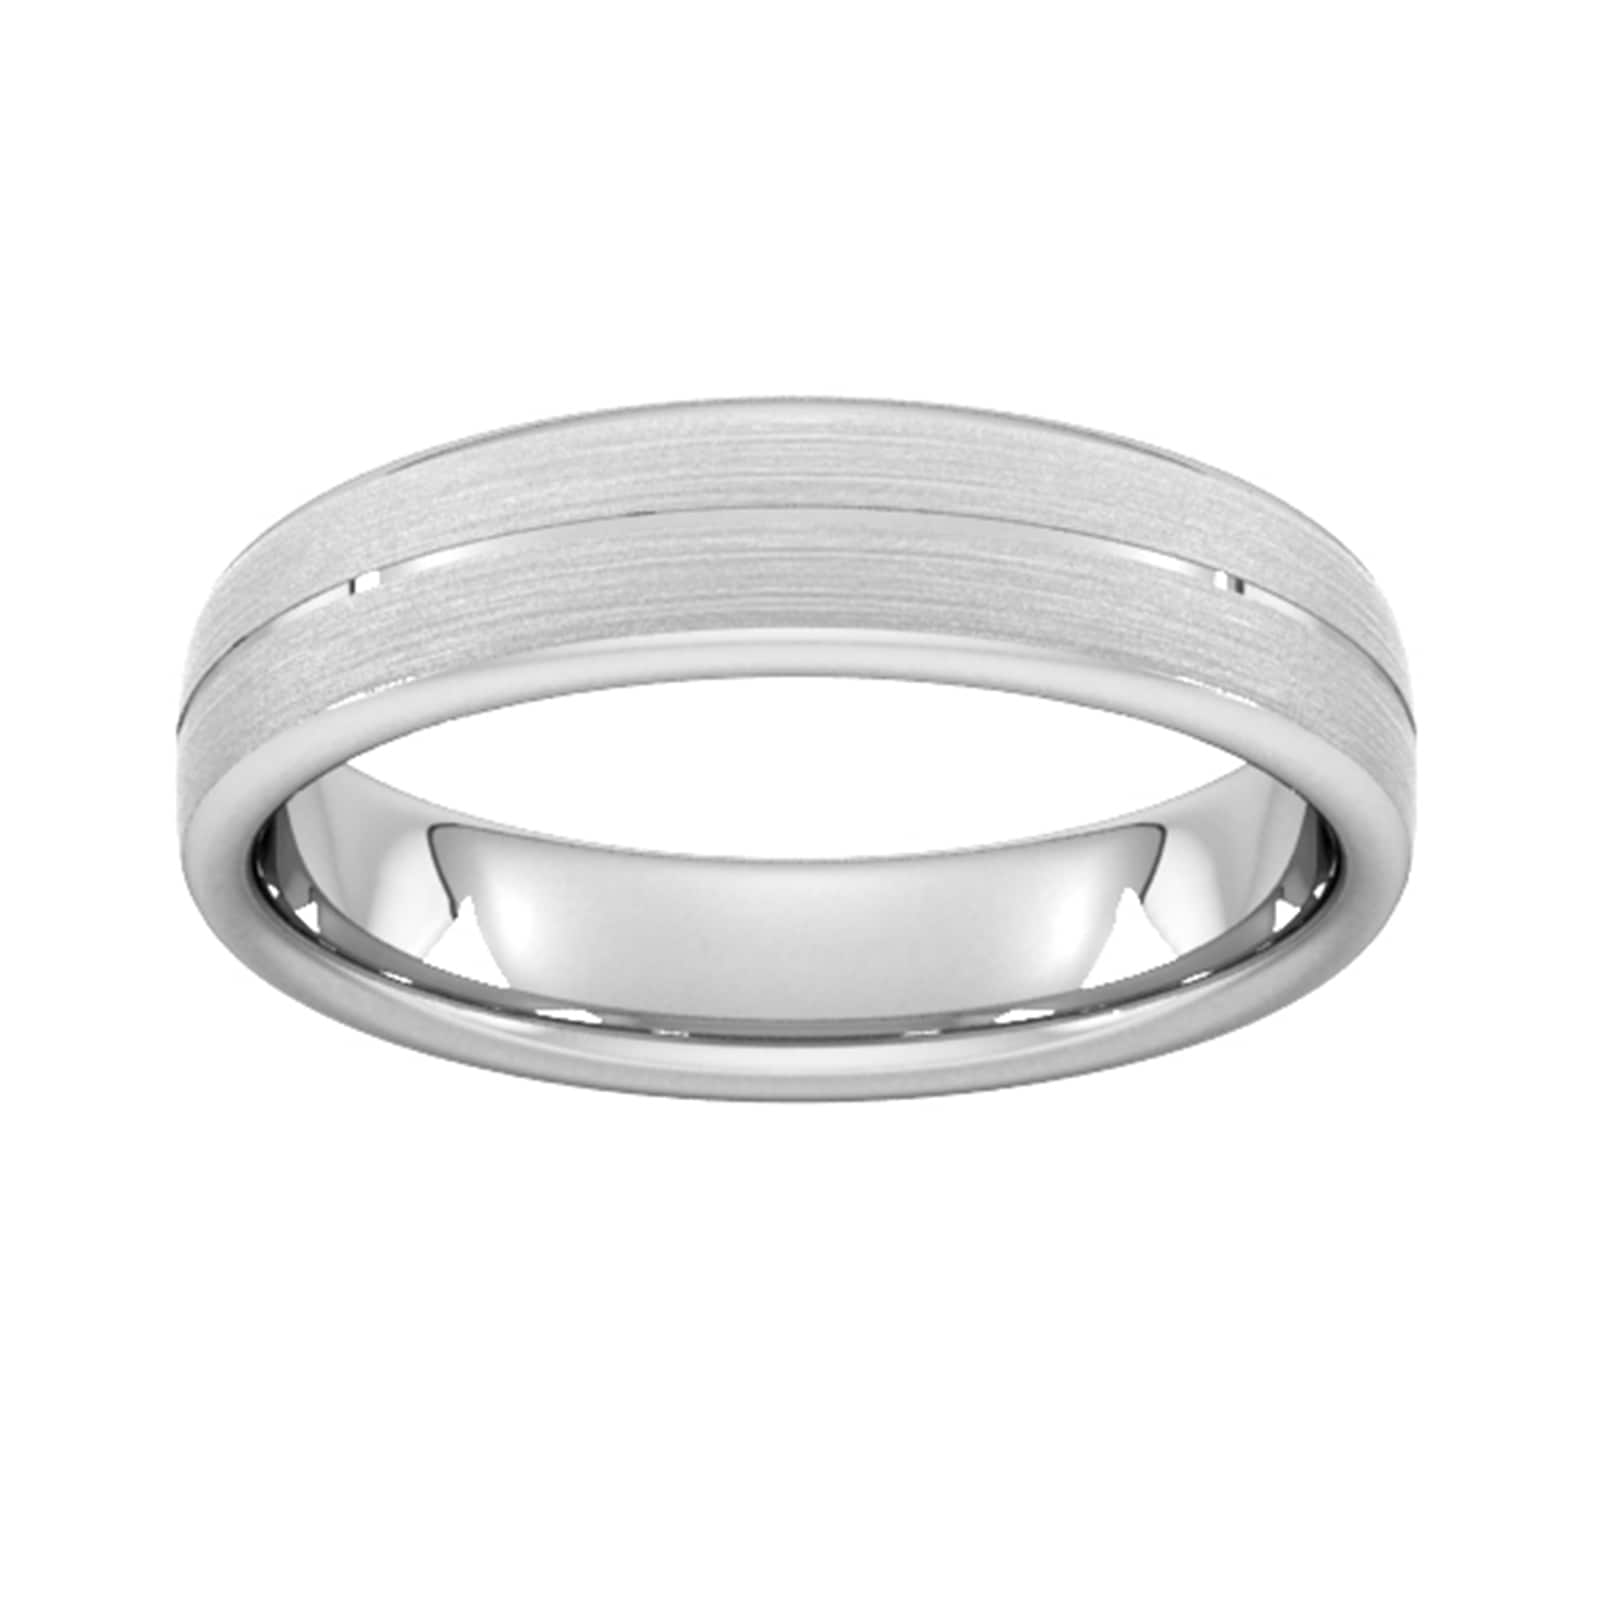 5mm Slight Court Heavy Centre Groove With Chamfered Edge Wedding Ring In Platinum - Ring Size P